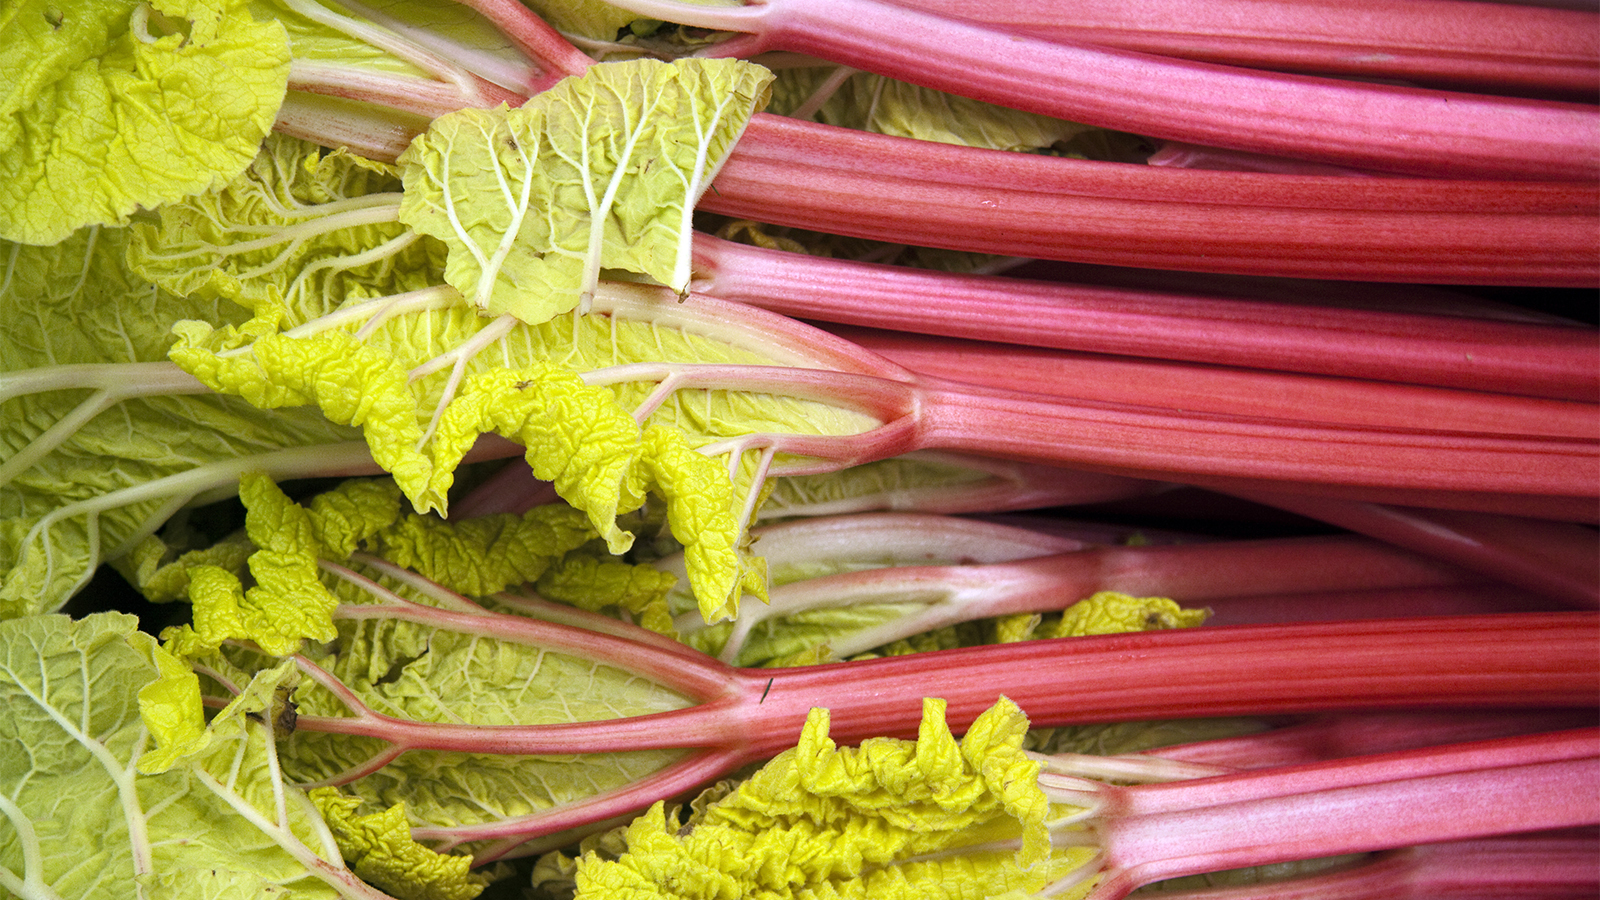 how poisonous is rhubarb pie and which other vegetables contain oxalic acid